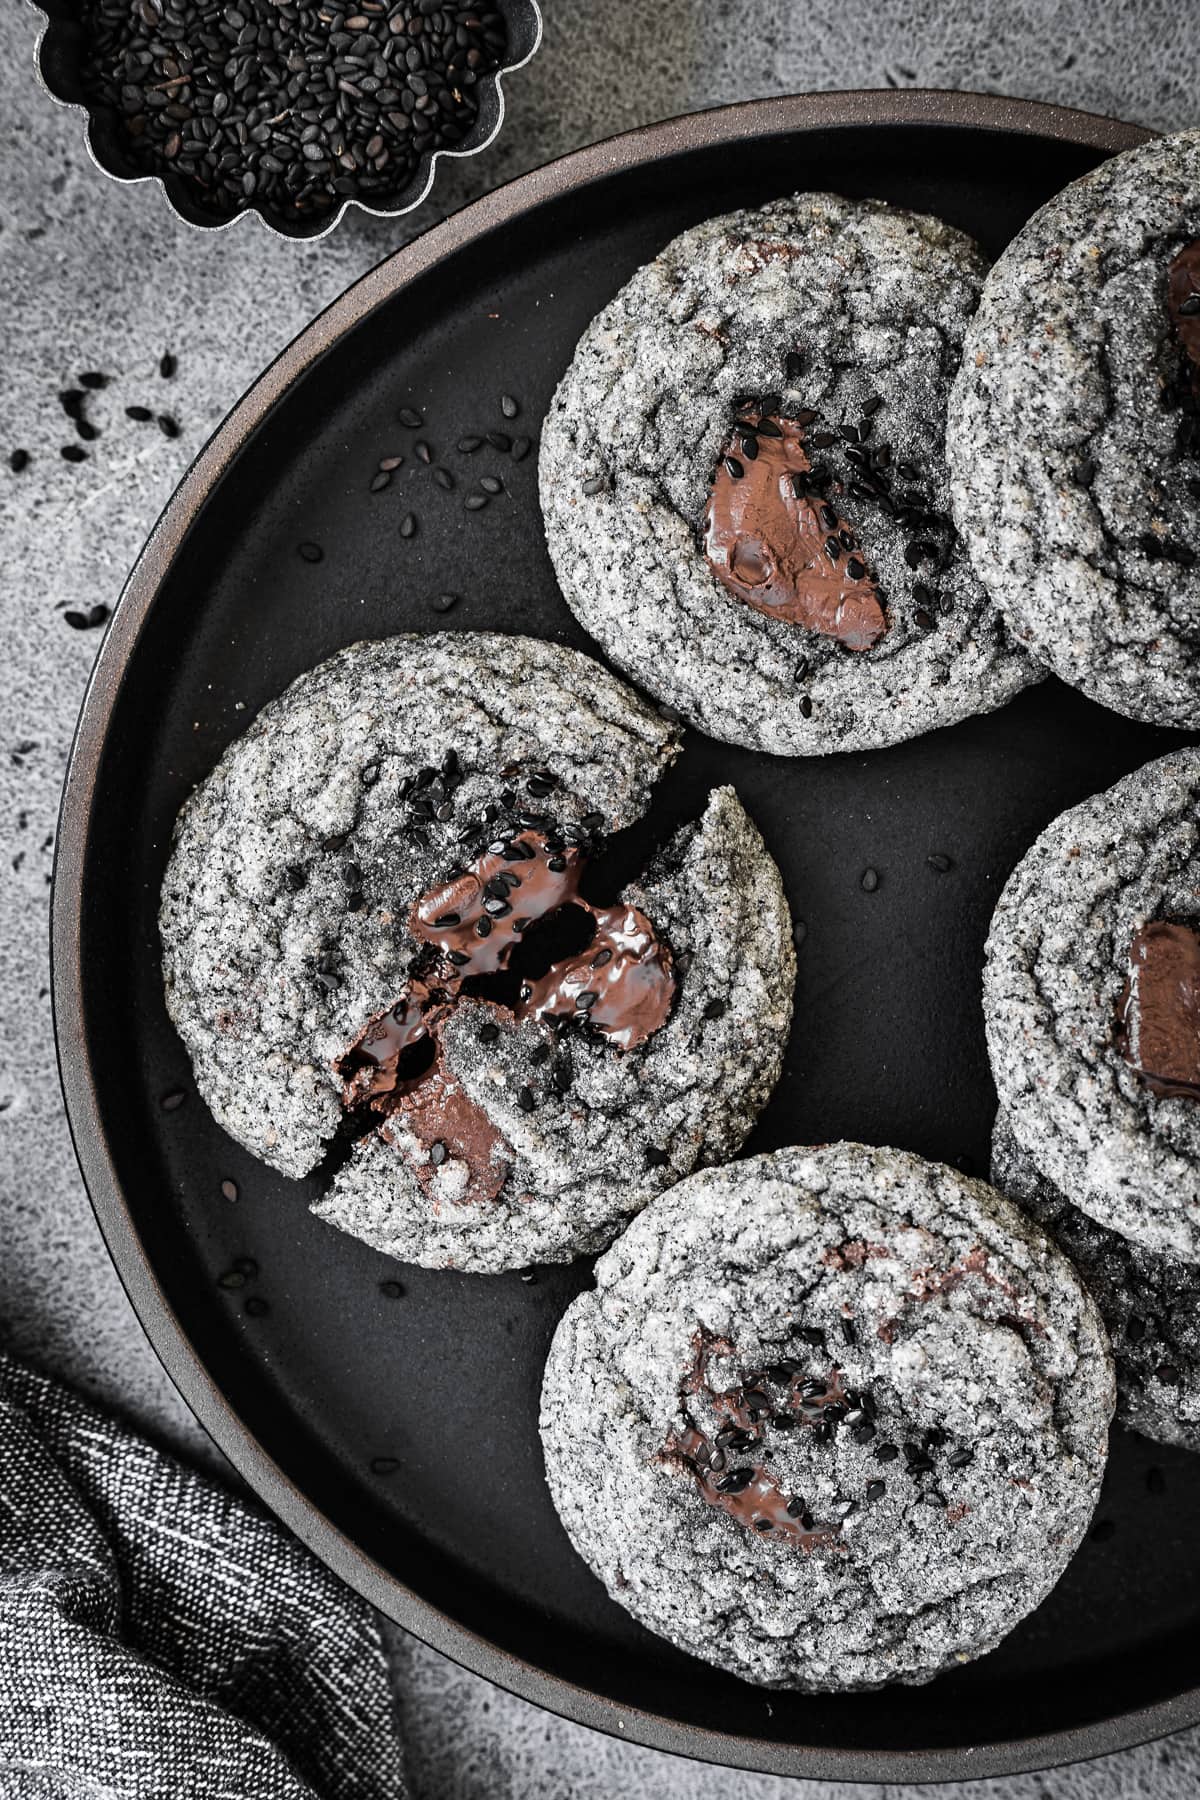 A closeup photo of cookies on a black plate, resting on a grey stone surface. The cookies have pools of melted chocolate and are sprinkled with black sesame seeds.